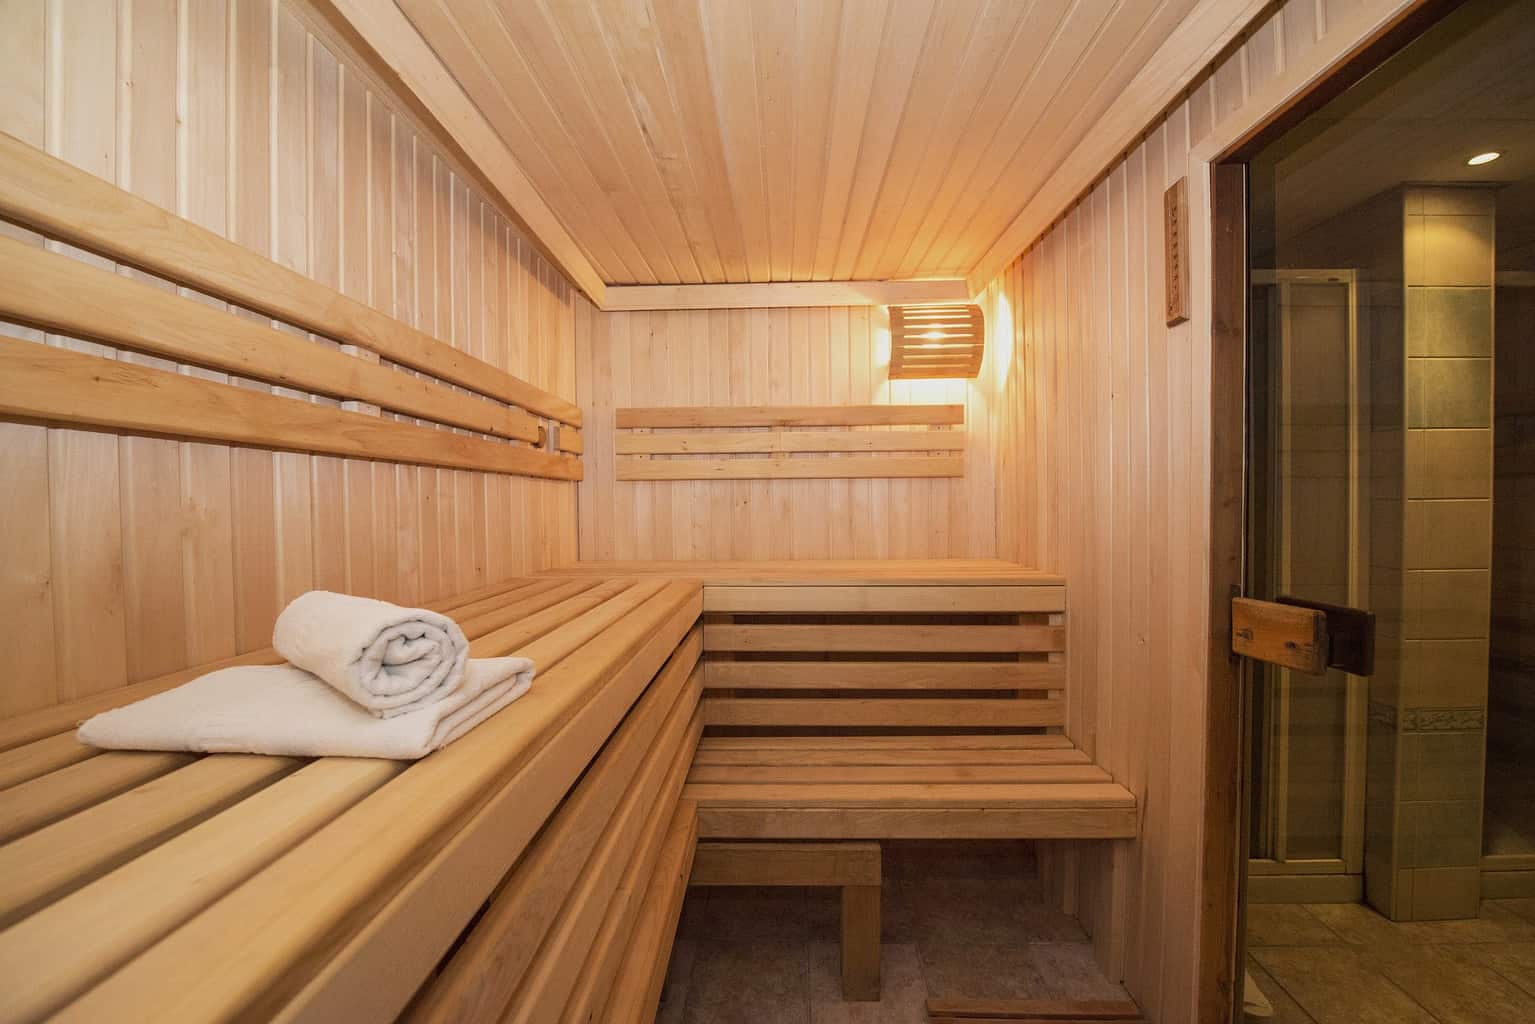 Can You Lose Weight with Regular Sauna Use